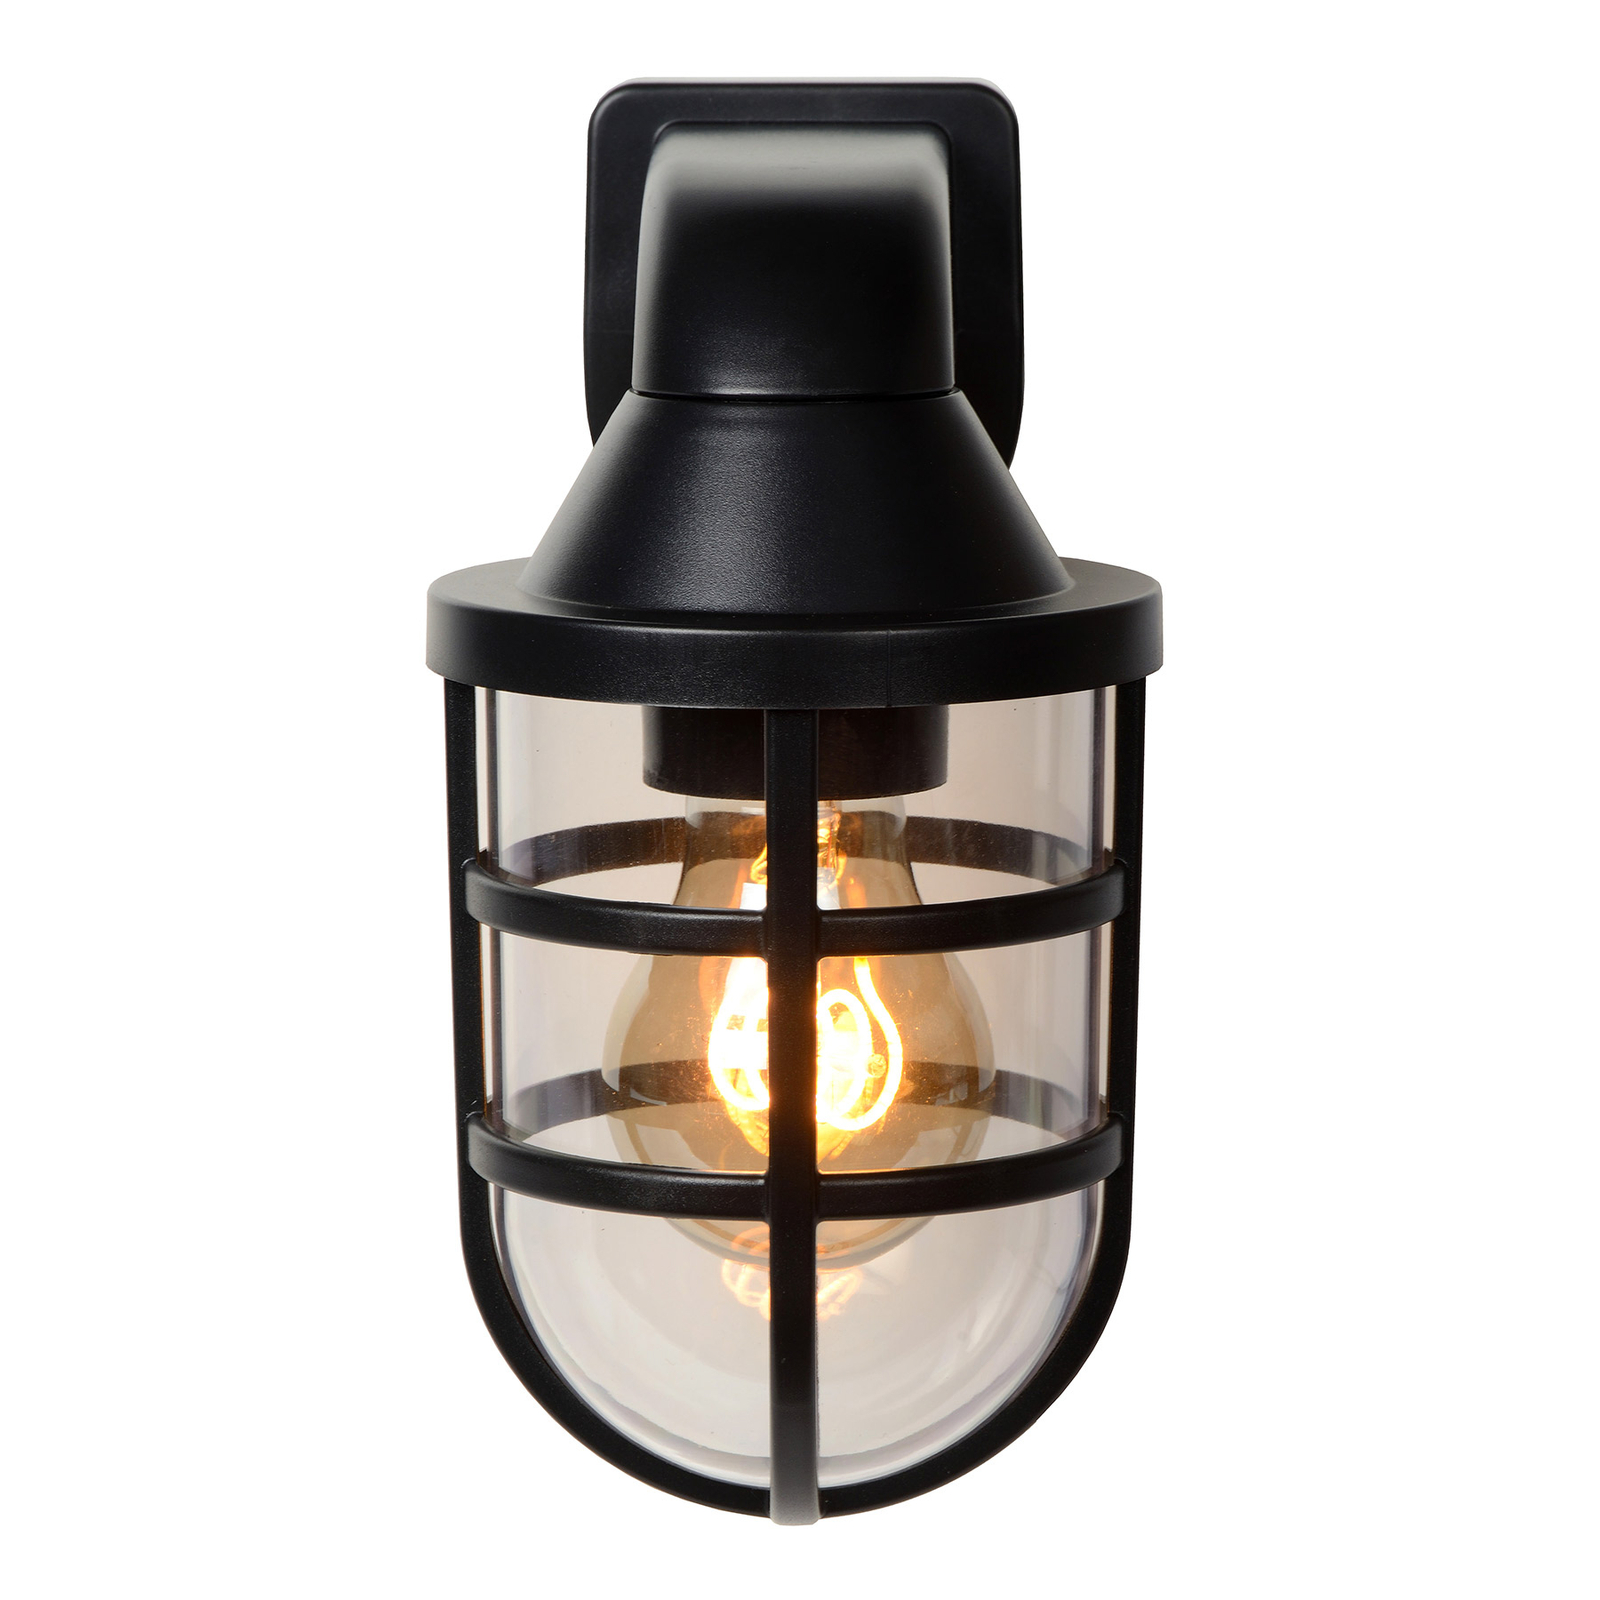 Lewis outdoor wall light, black